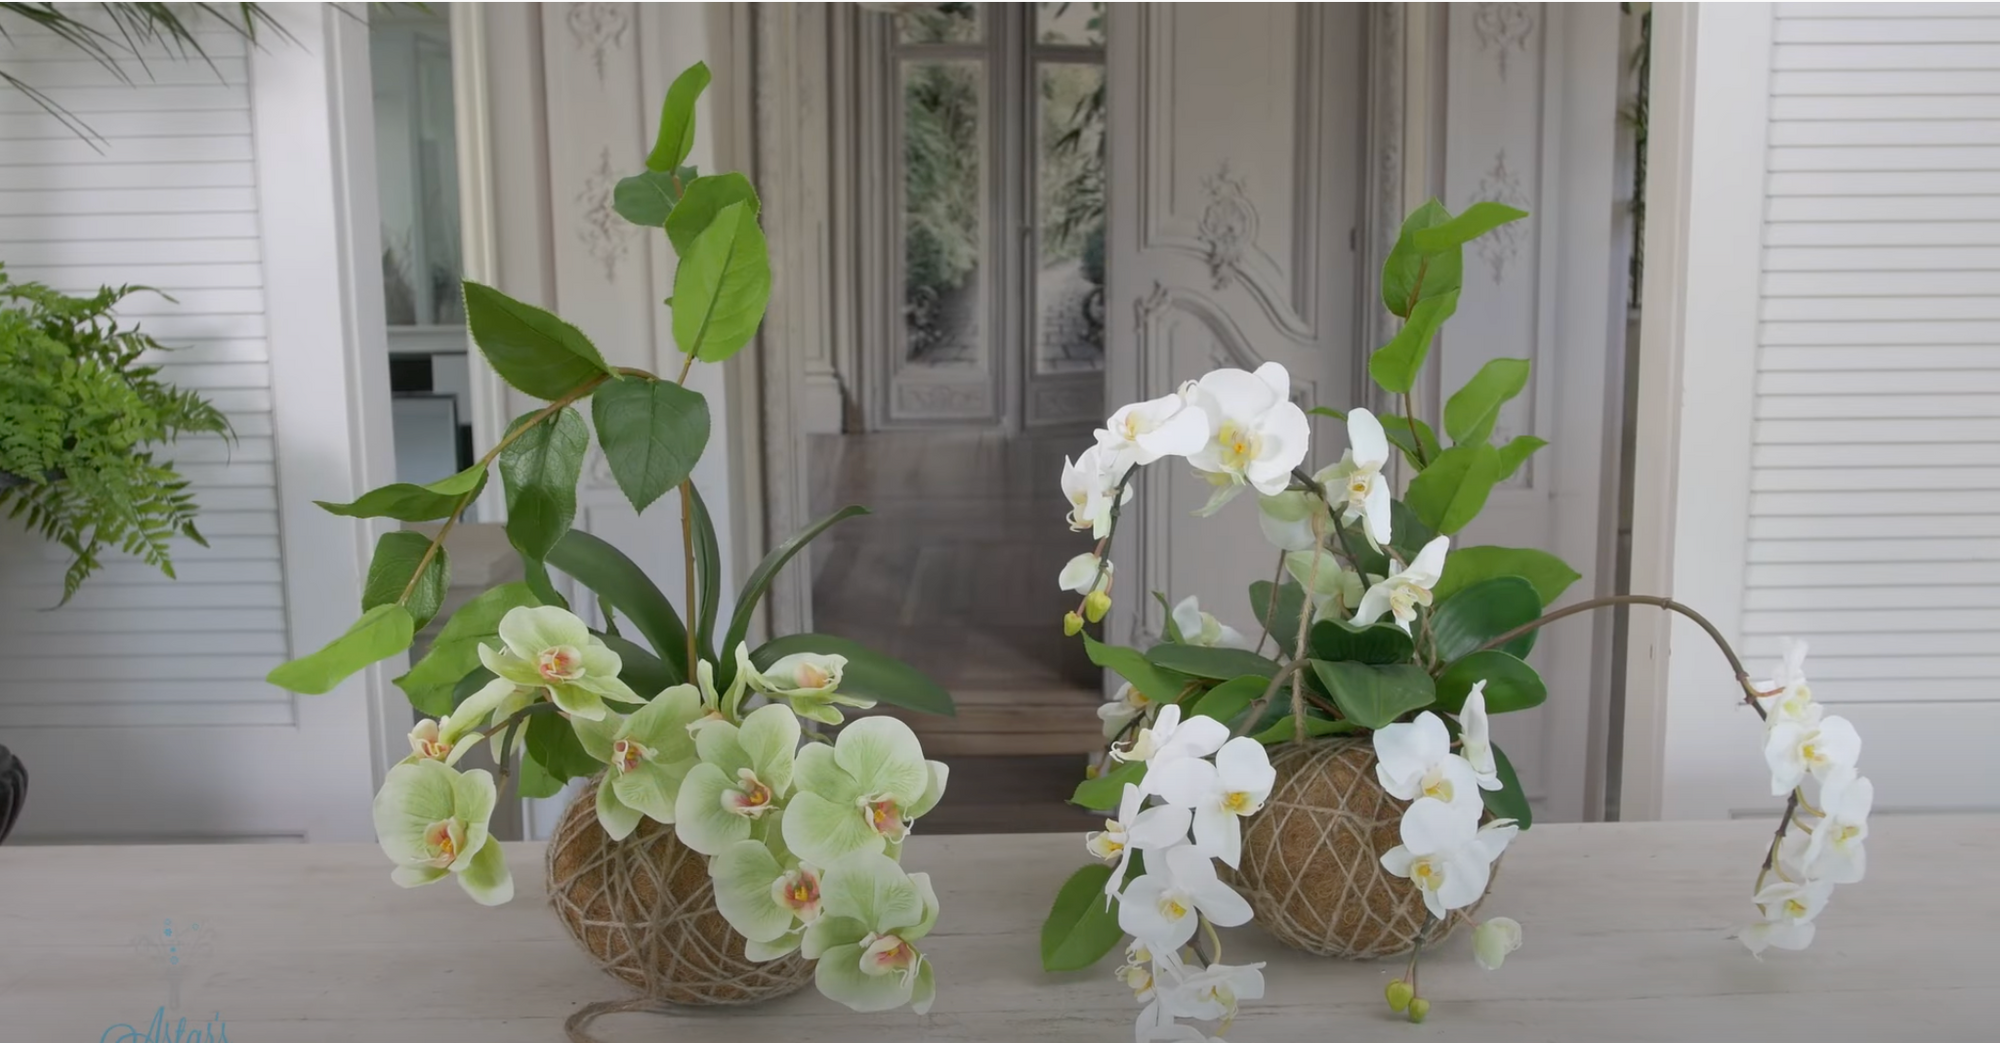 How to use Kokedama balls to display moth orchids